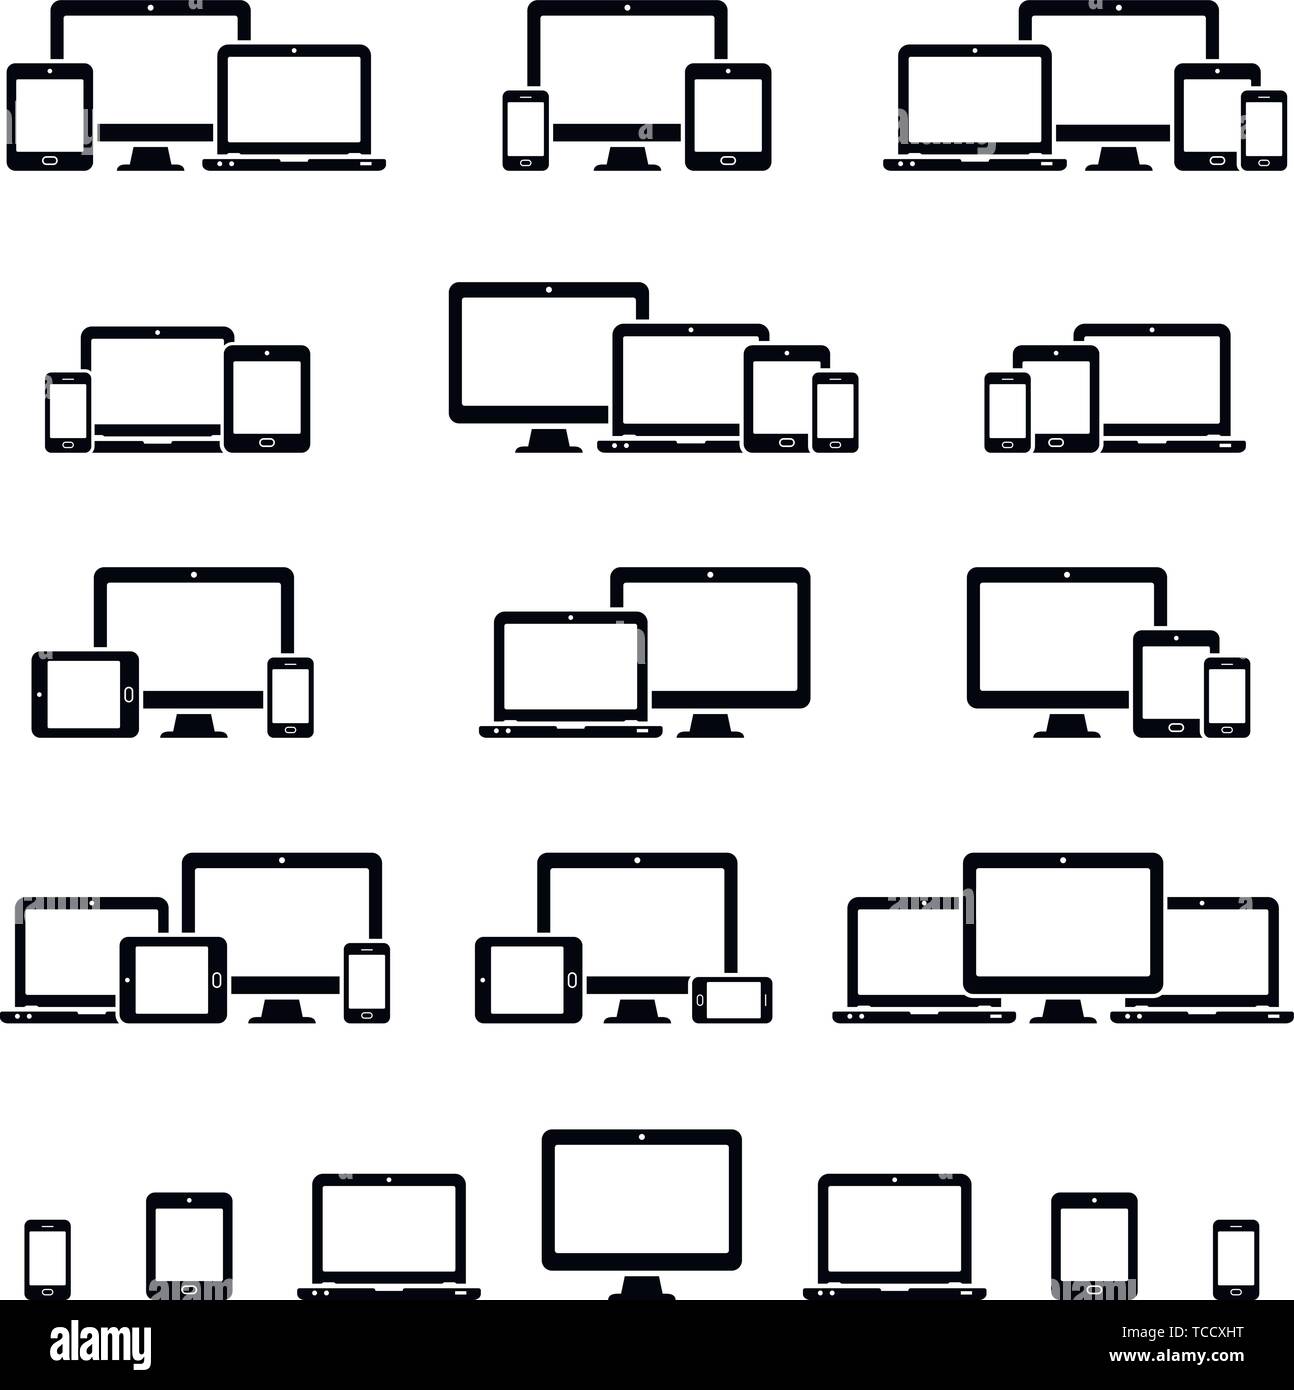 Responsive web design icons for computer monitor, smartphone, tablet and laptop. Responsive web design icons in different positions. Stock Vector